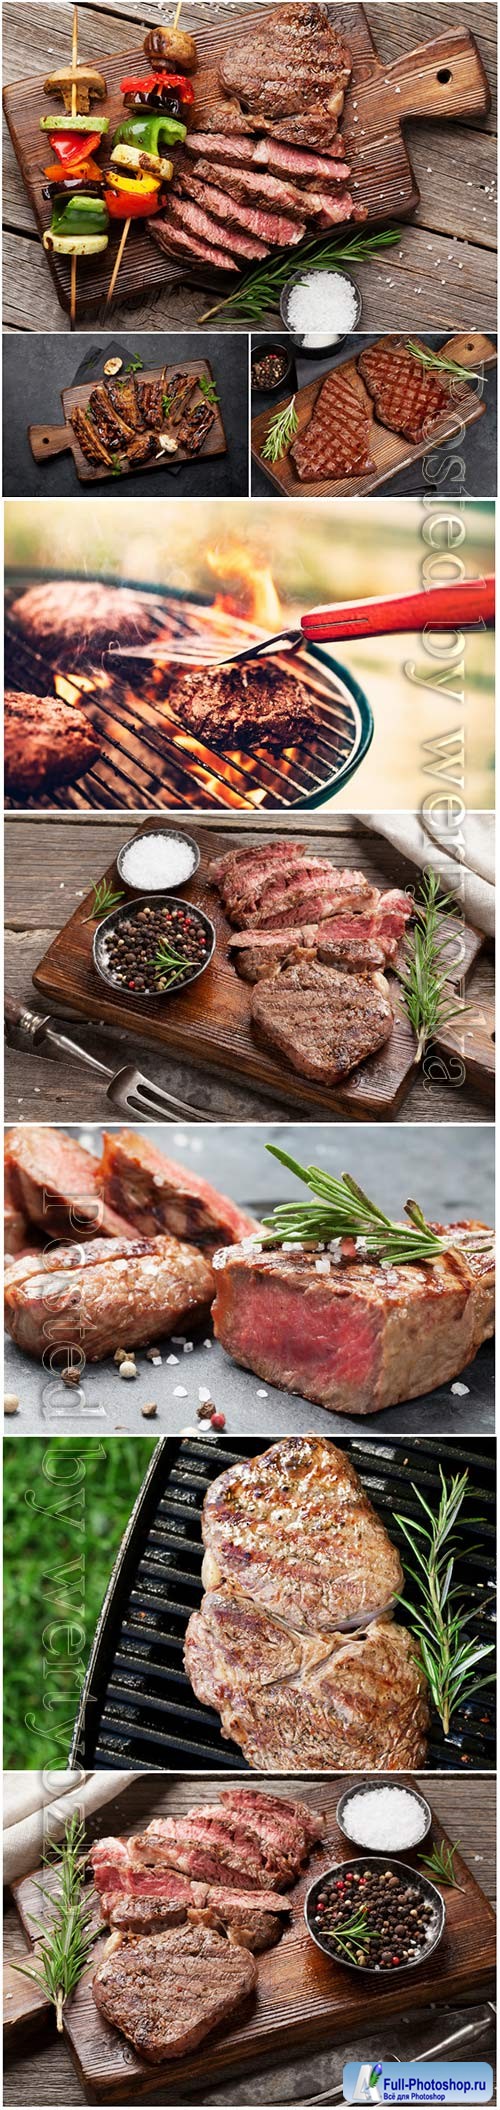 Meat, barbecue stock photo